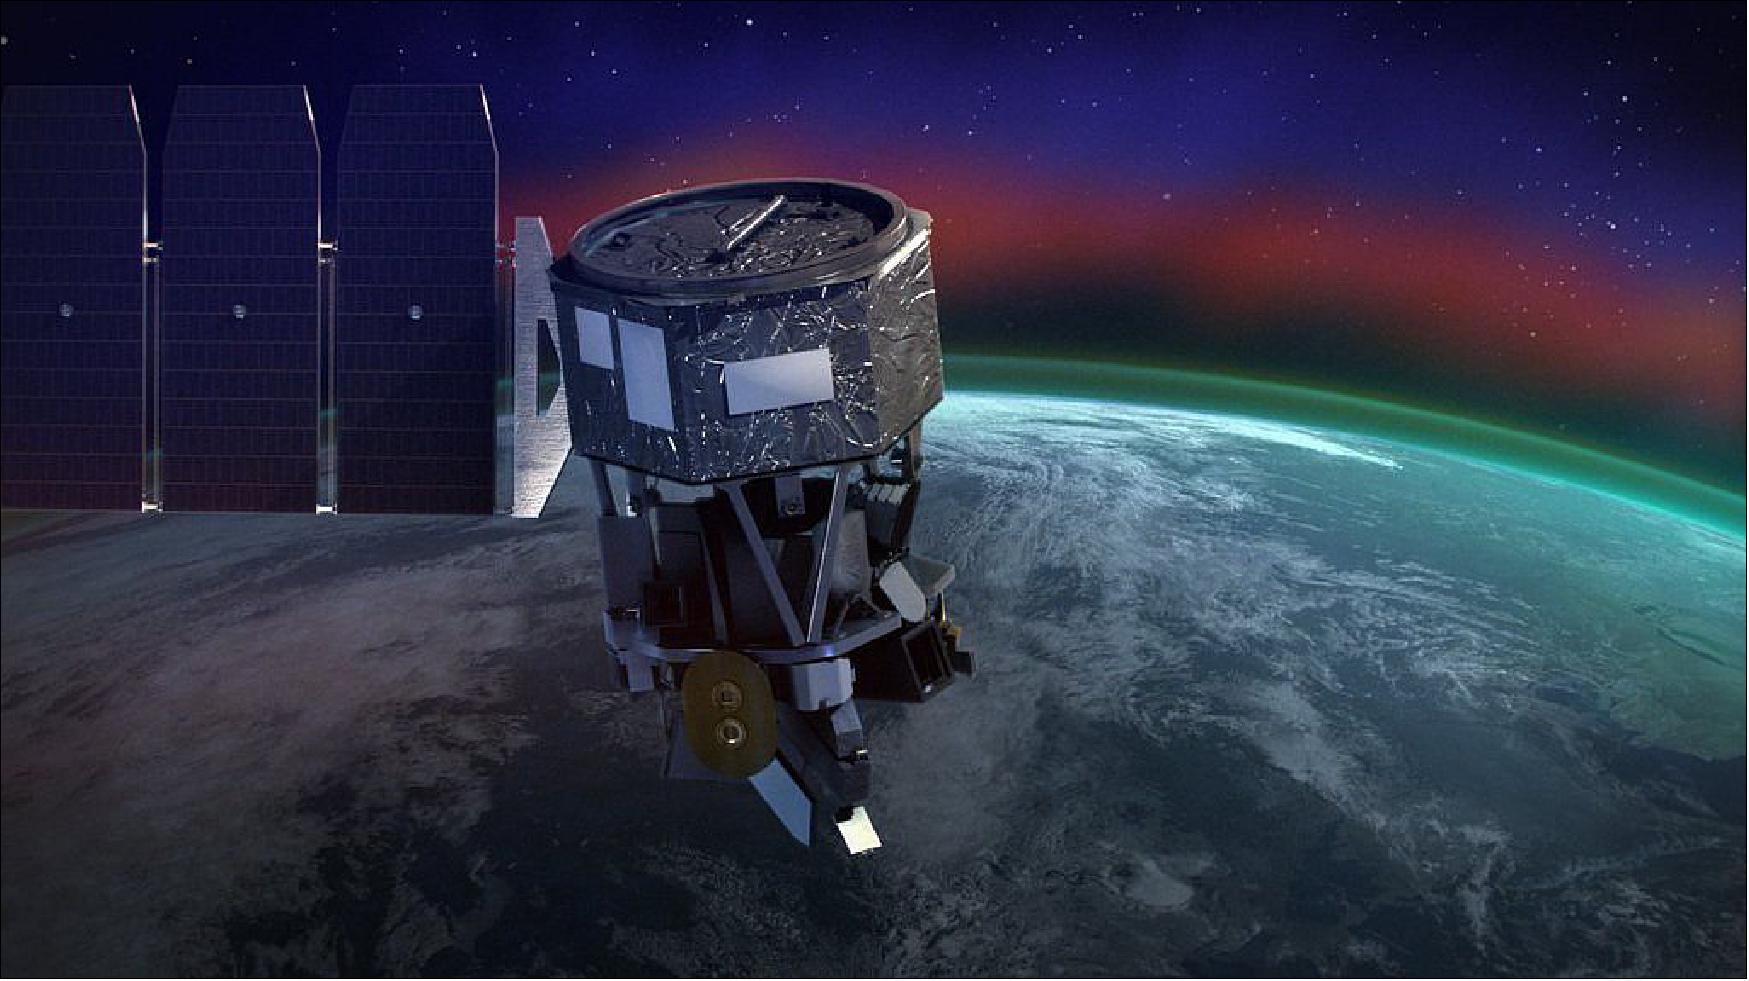 Figure 6: Artist's rendition of the deployed ICON spacecraft. Charged particles in the ionosphere create bands of color called airglow (image credit: NASA)